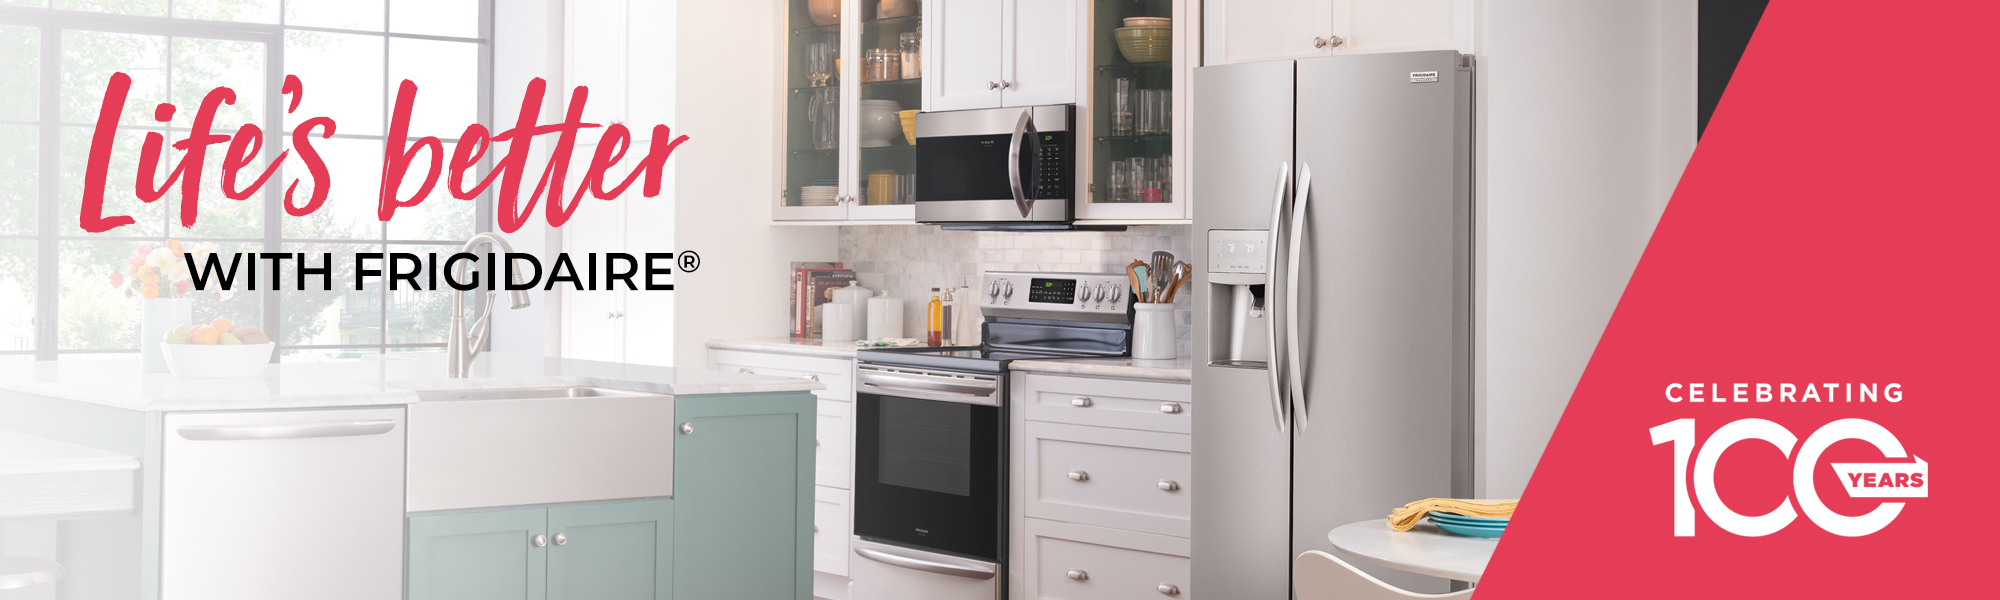 Home Appliances & Appliance Service in Savannah and Pooler, GA and Okatie,  SC.